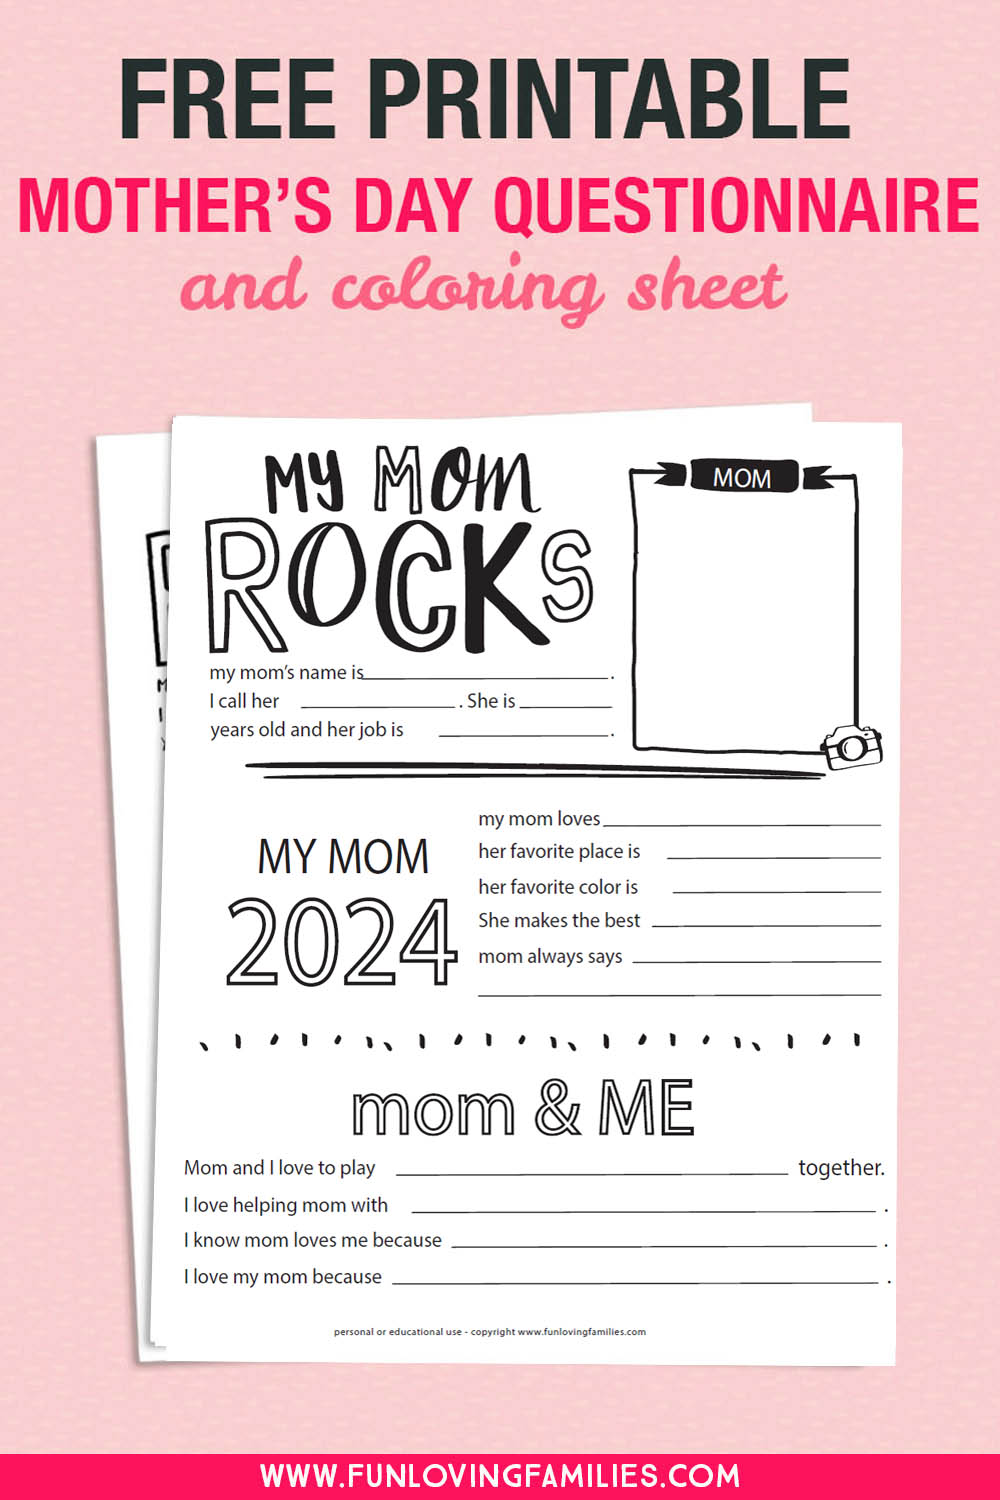 Mother's day questionaire printable